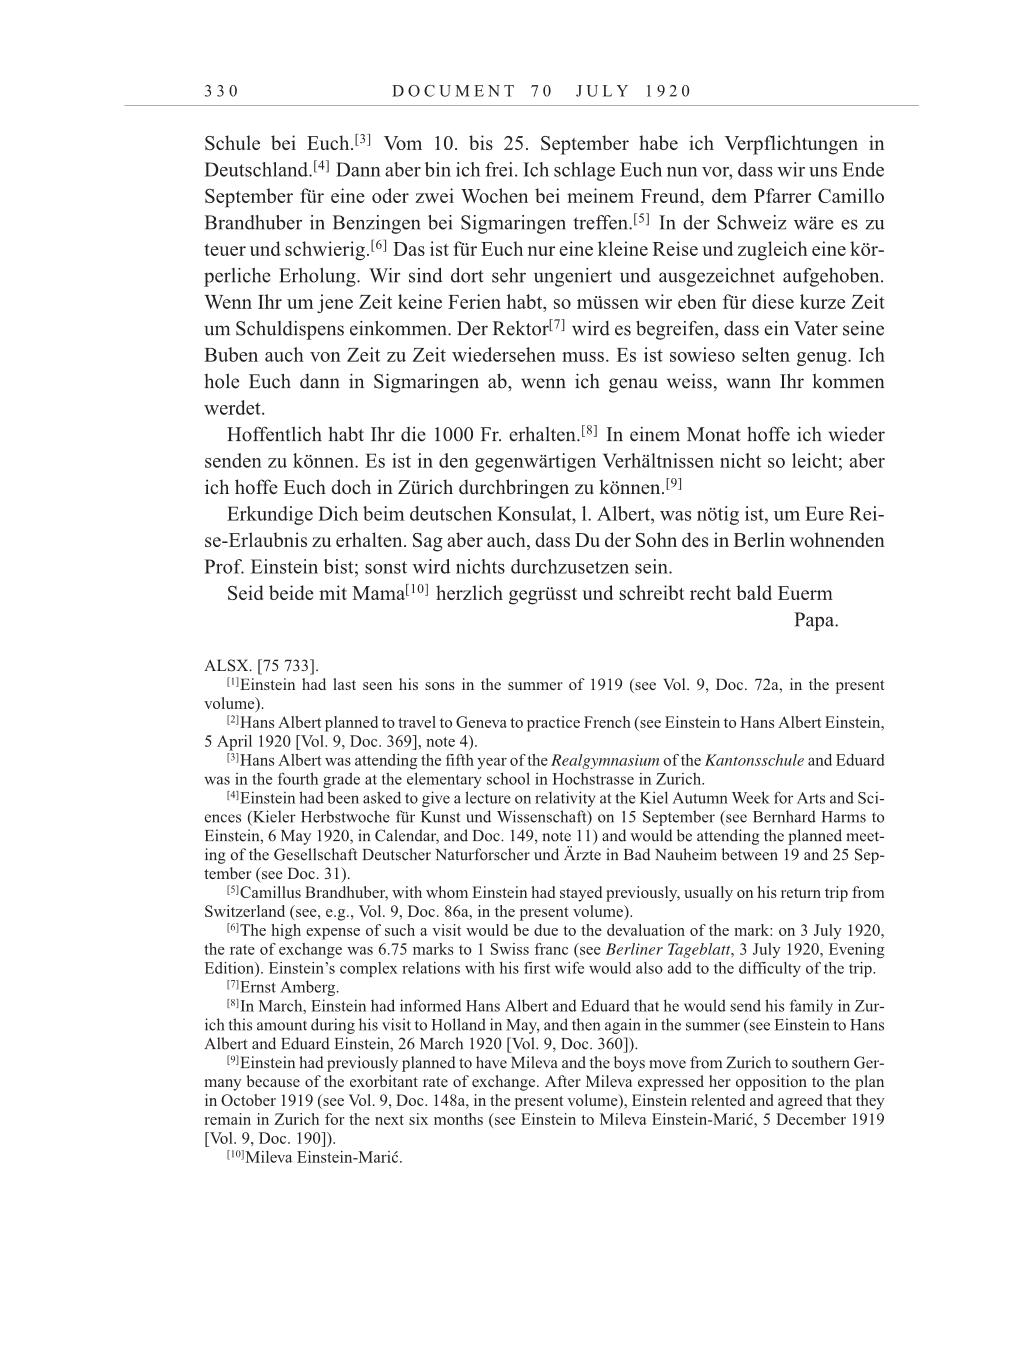 Volume 10: The Berlin Years: Correspondence May-December 1920 / Supplementary Correspondence 1909-1920 page 330